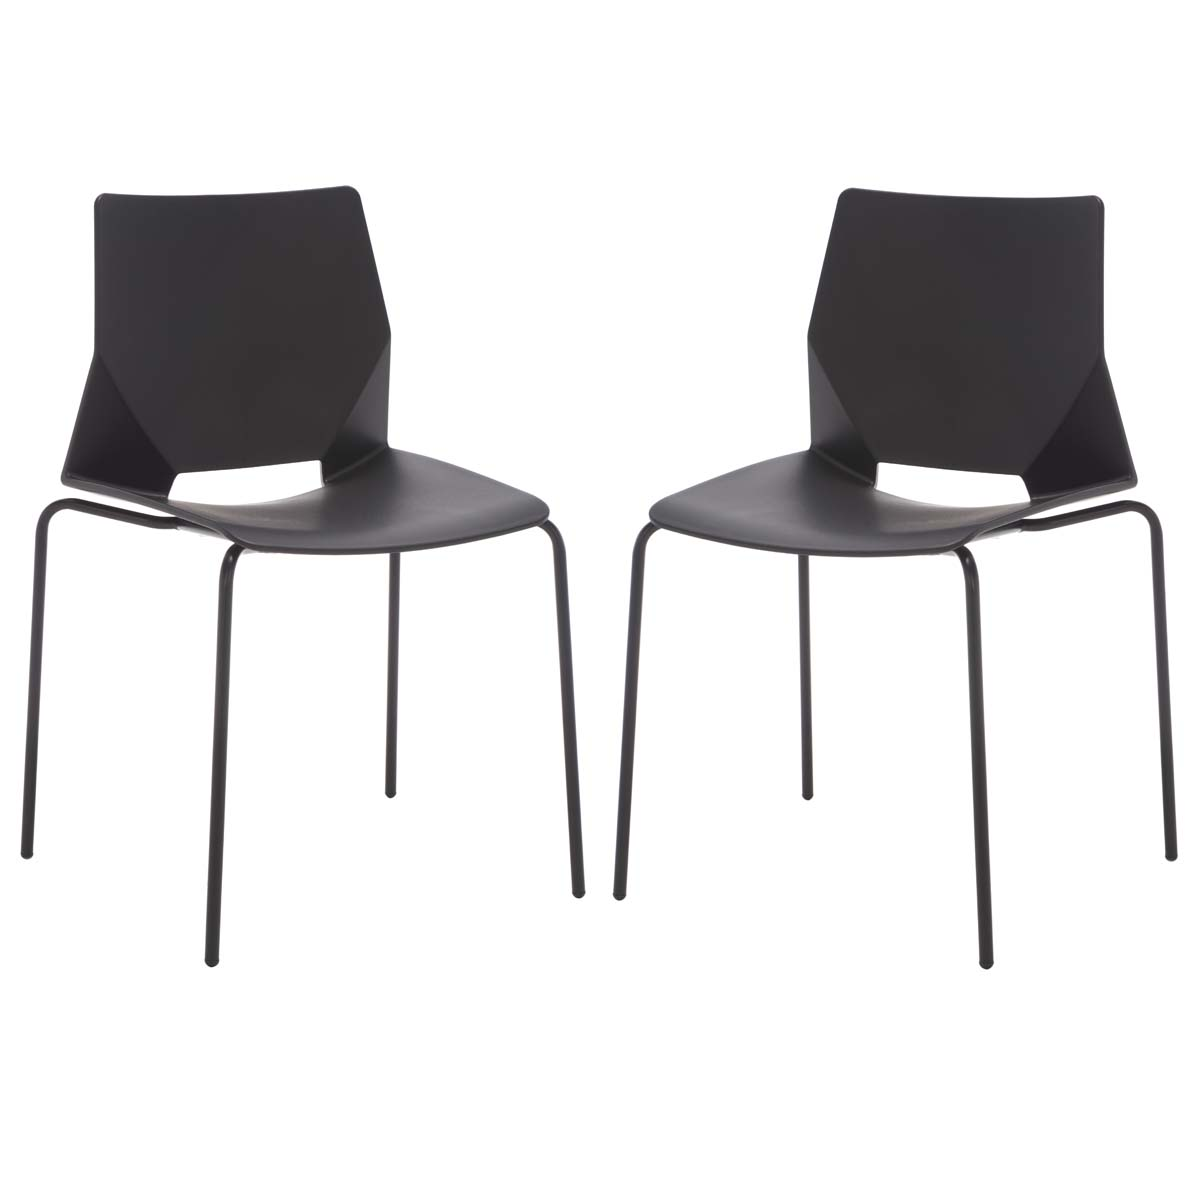 Safavieh Couture Nellie Dining Chairs (Set of 2)